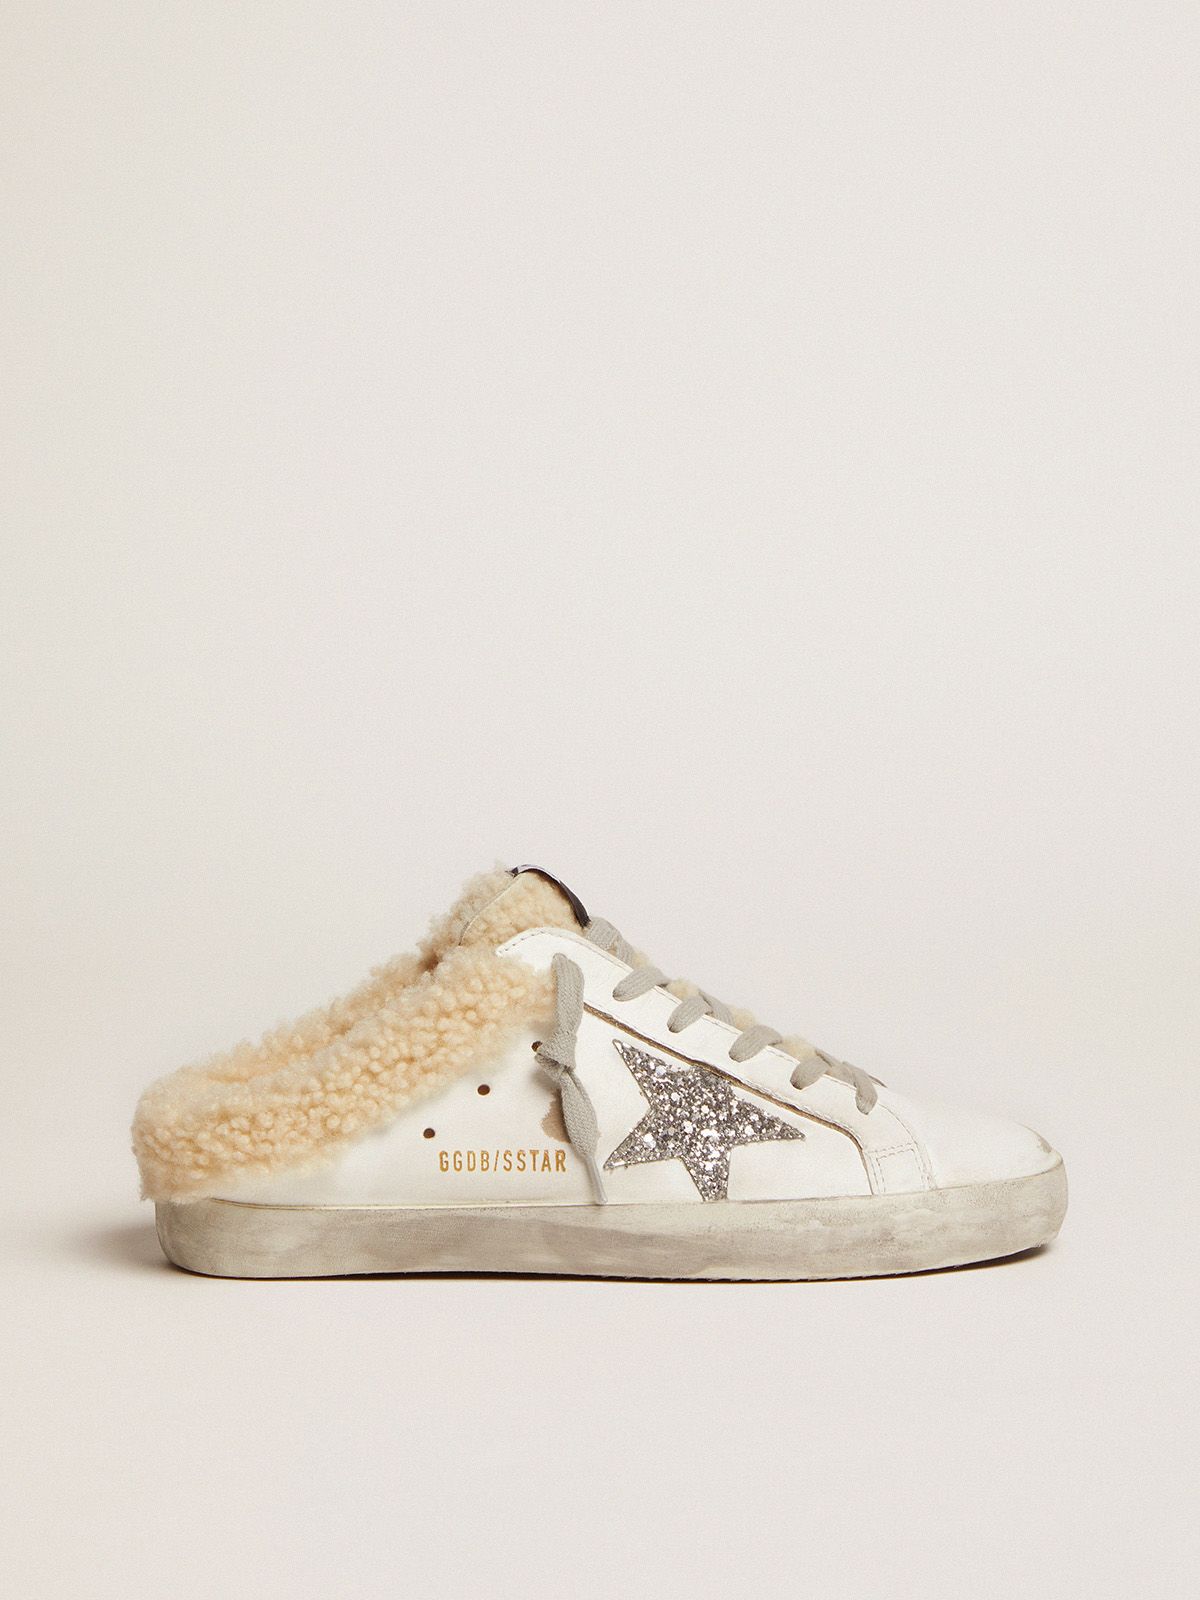 Golden Goose Stardan Super-Star Sabots in white leather with silver glitter star and shearling lining